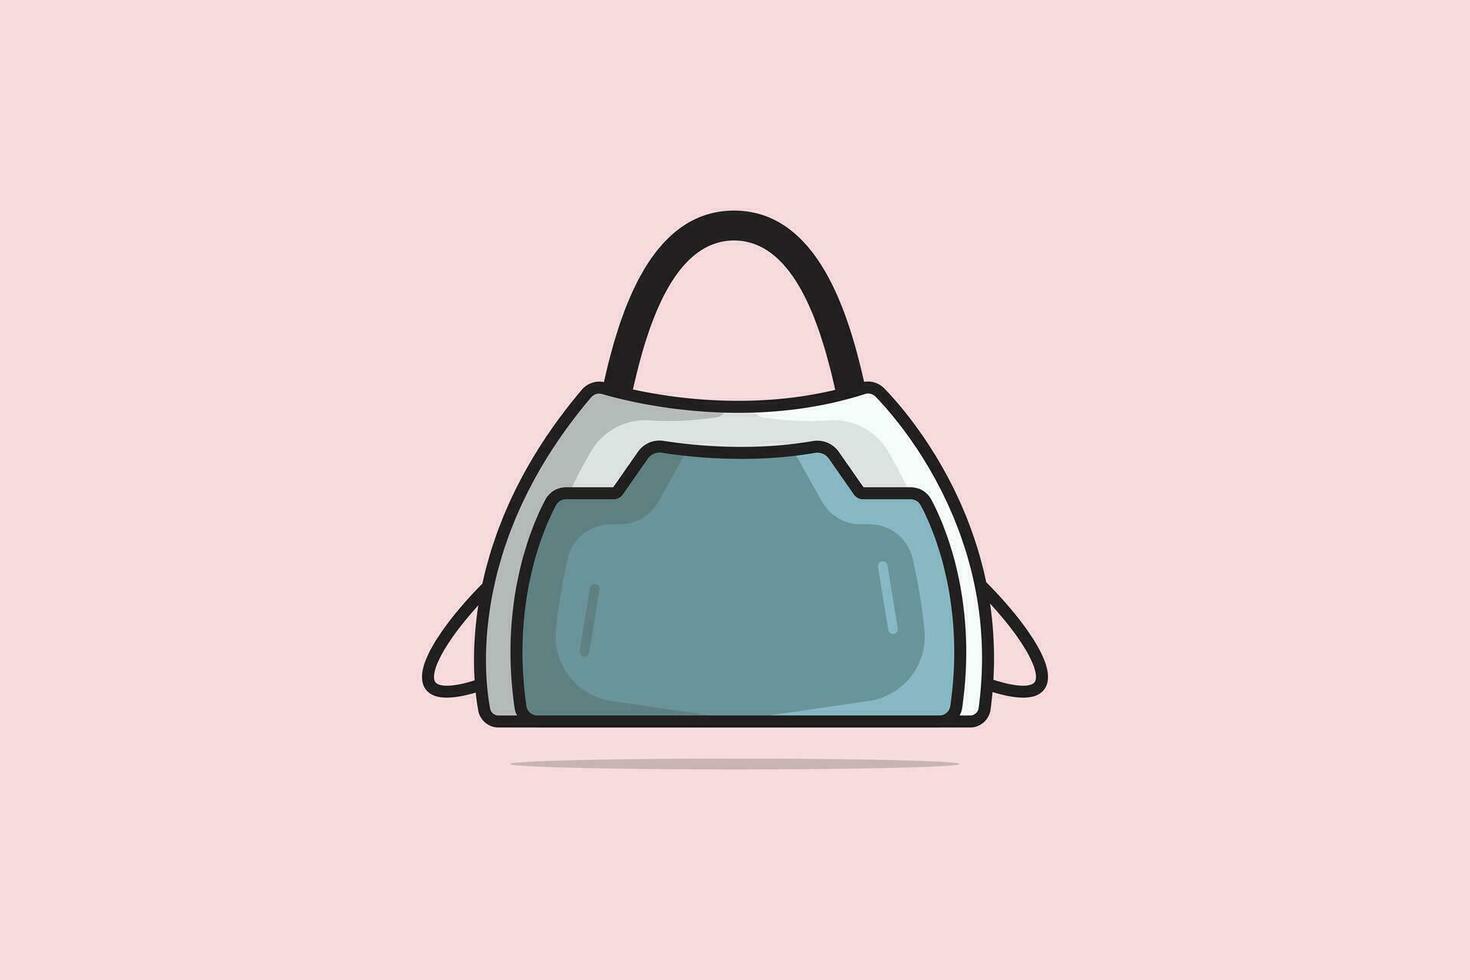 Stylish Leather Bags, Trendy Casual Style Handbags vector illustration. Beauty fashion objects icon concept. Female colorful unique purse vector design.